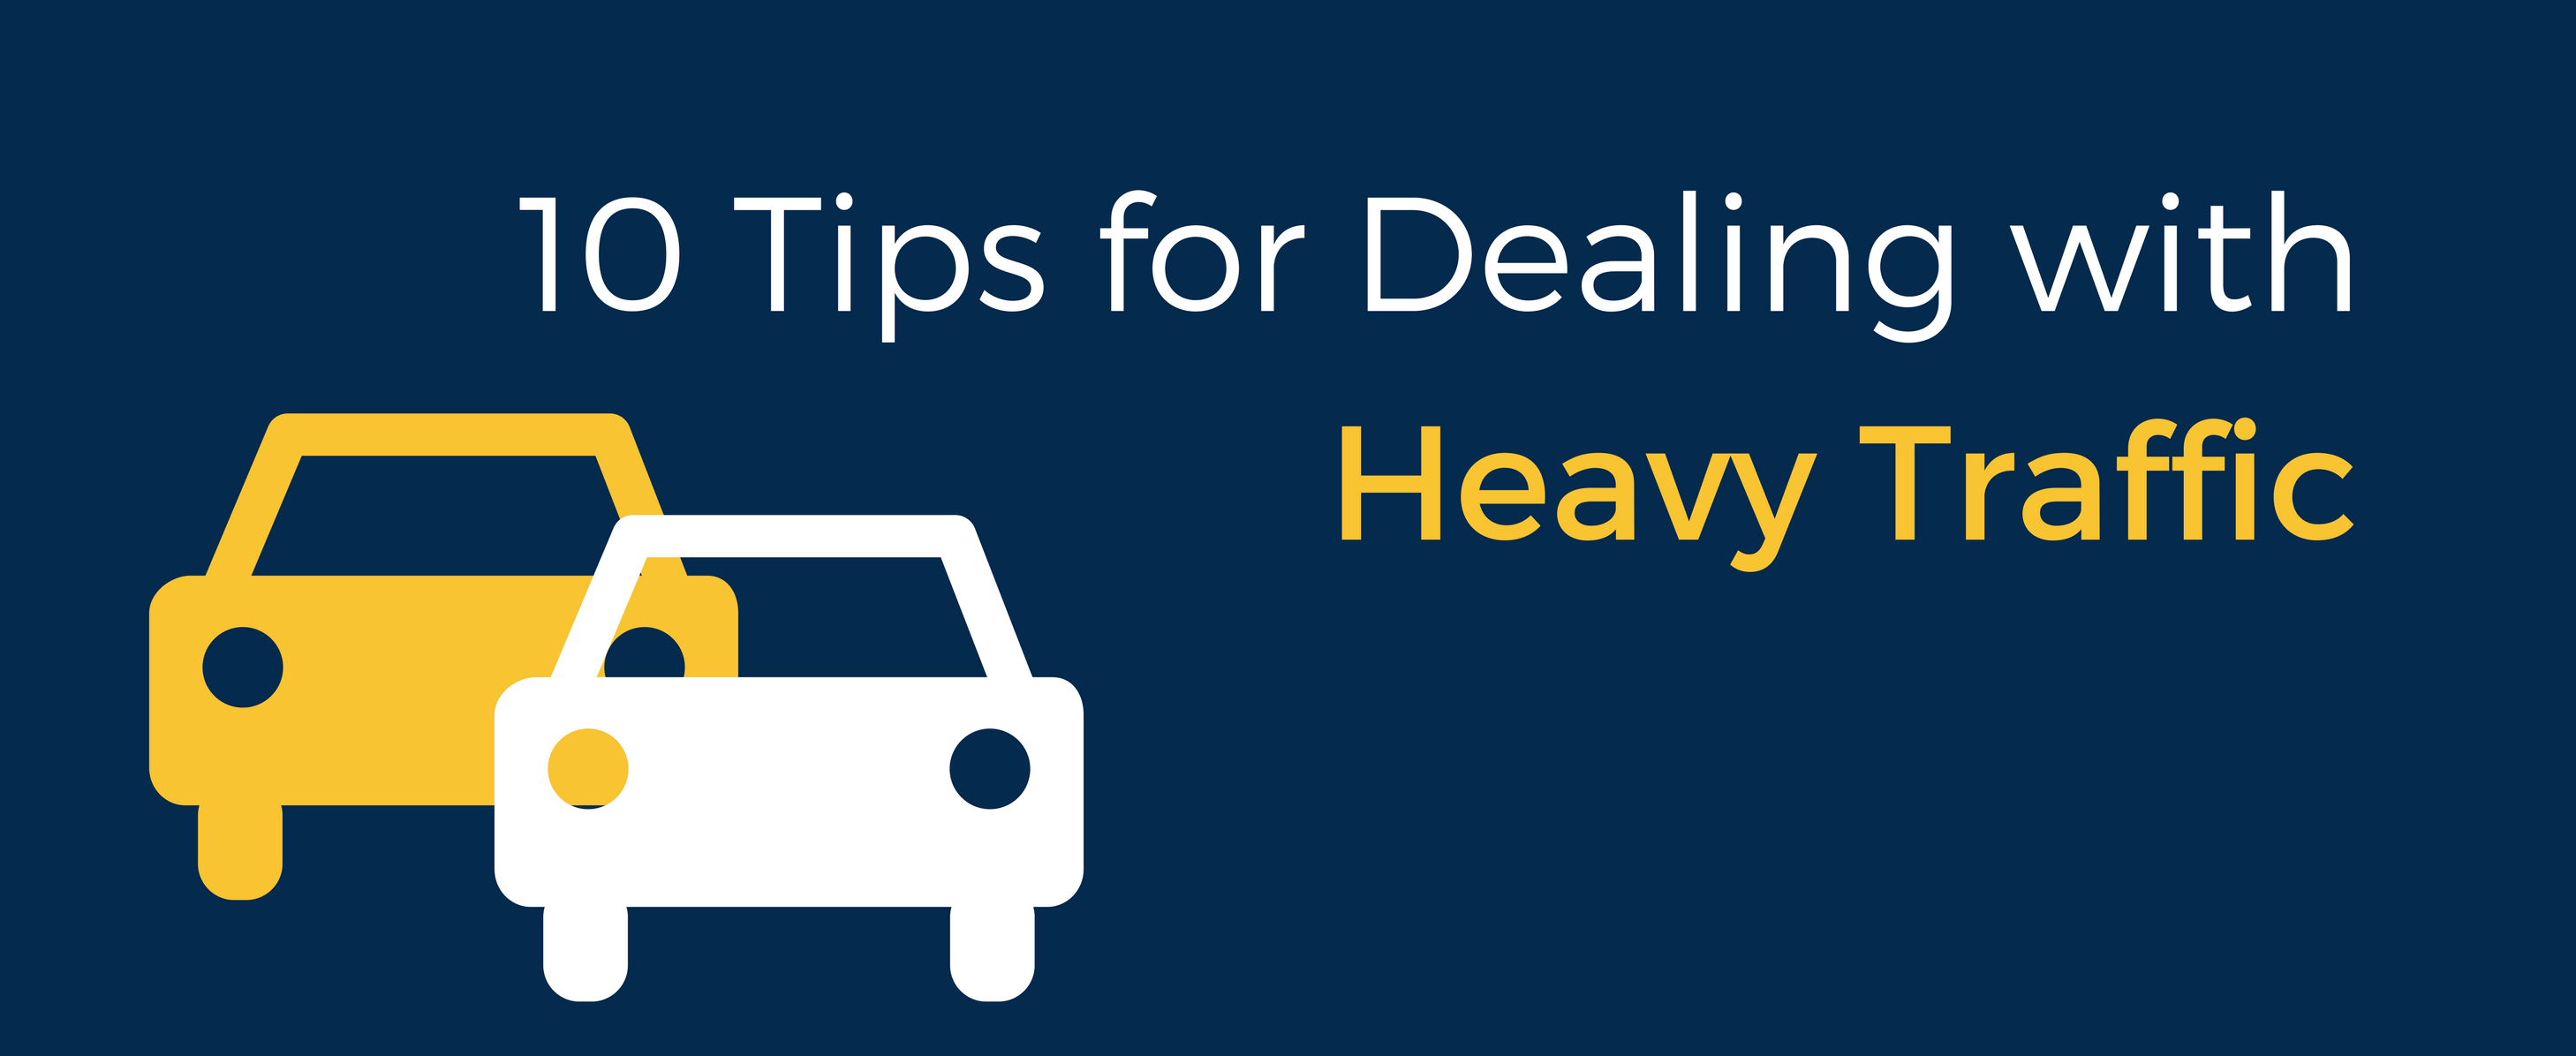 10 Tips for dealing with heavy traffic. *car image*